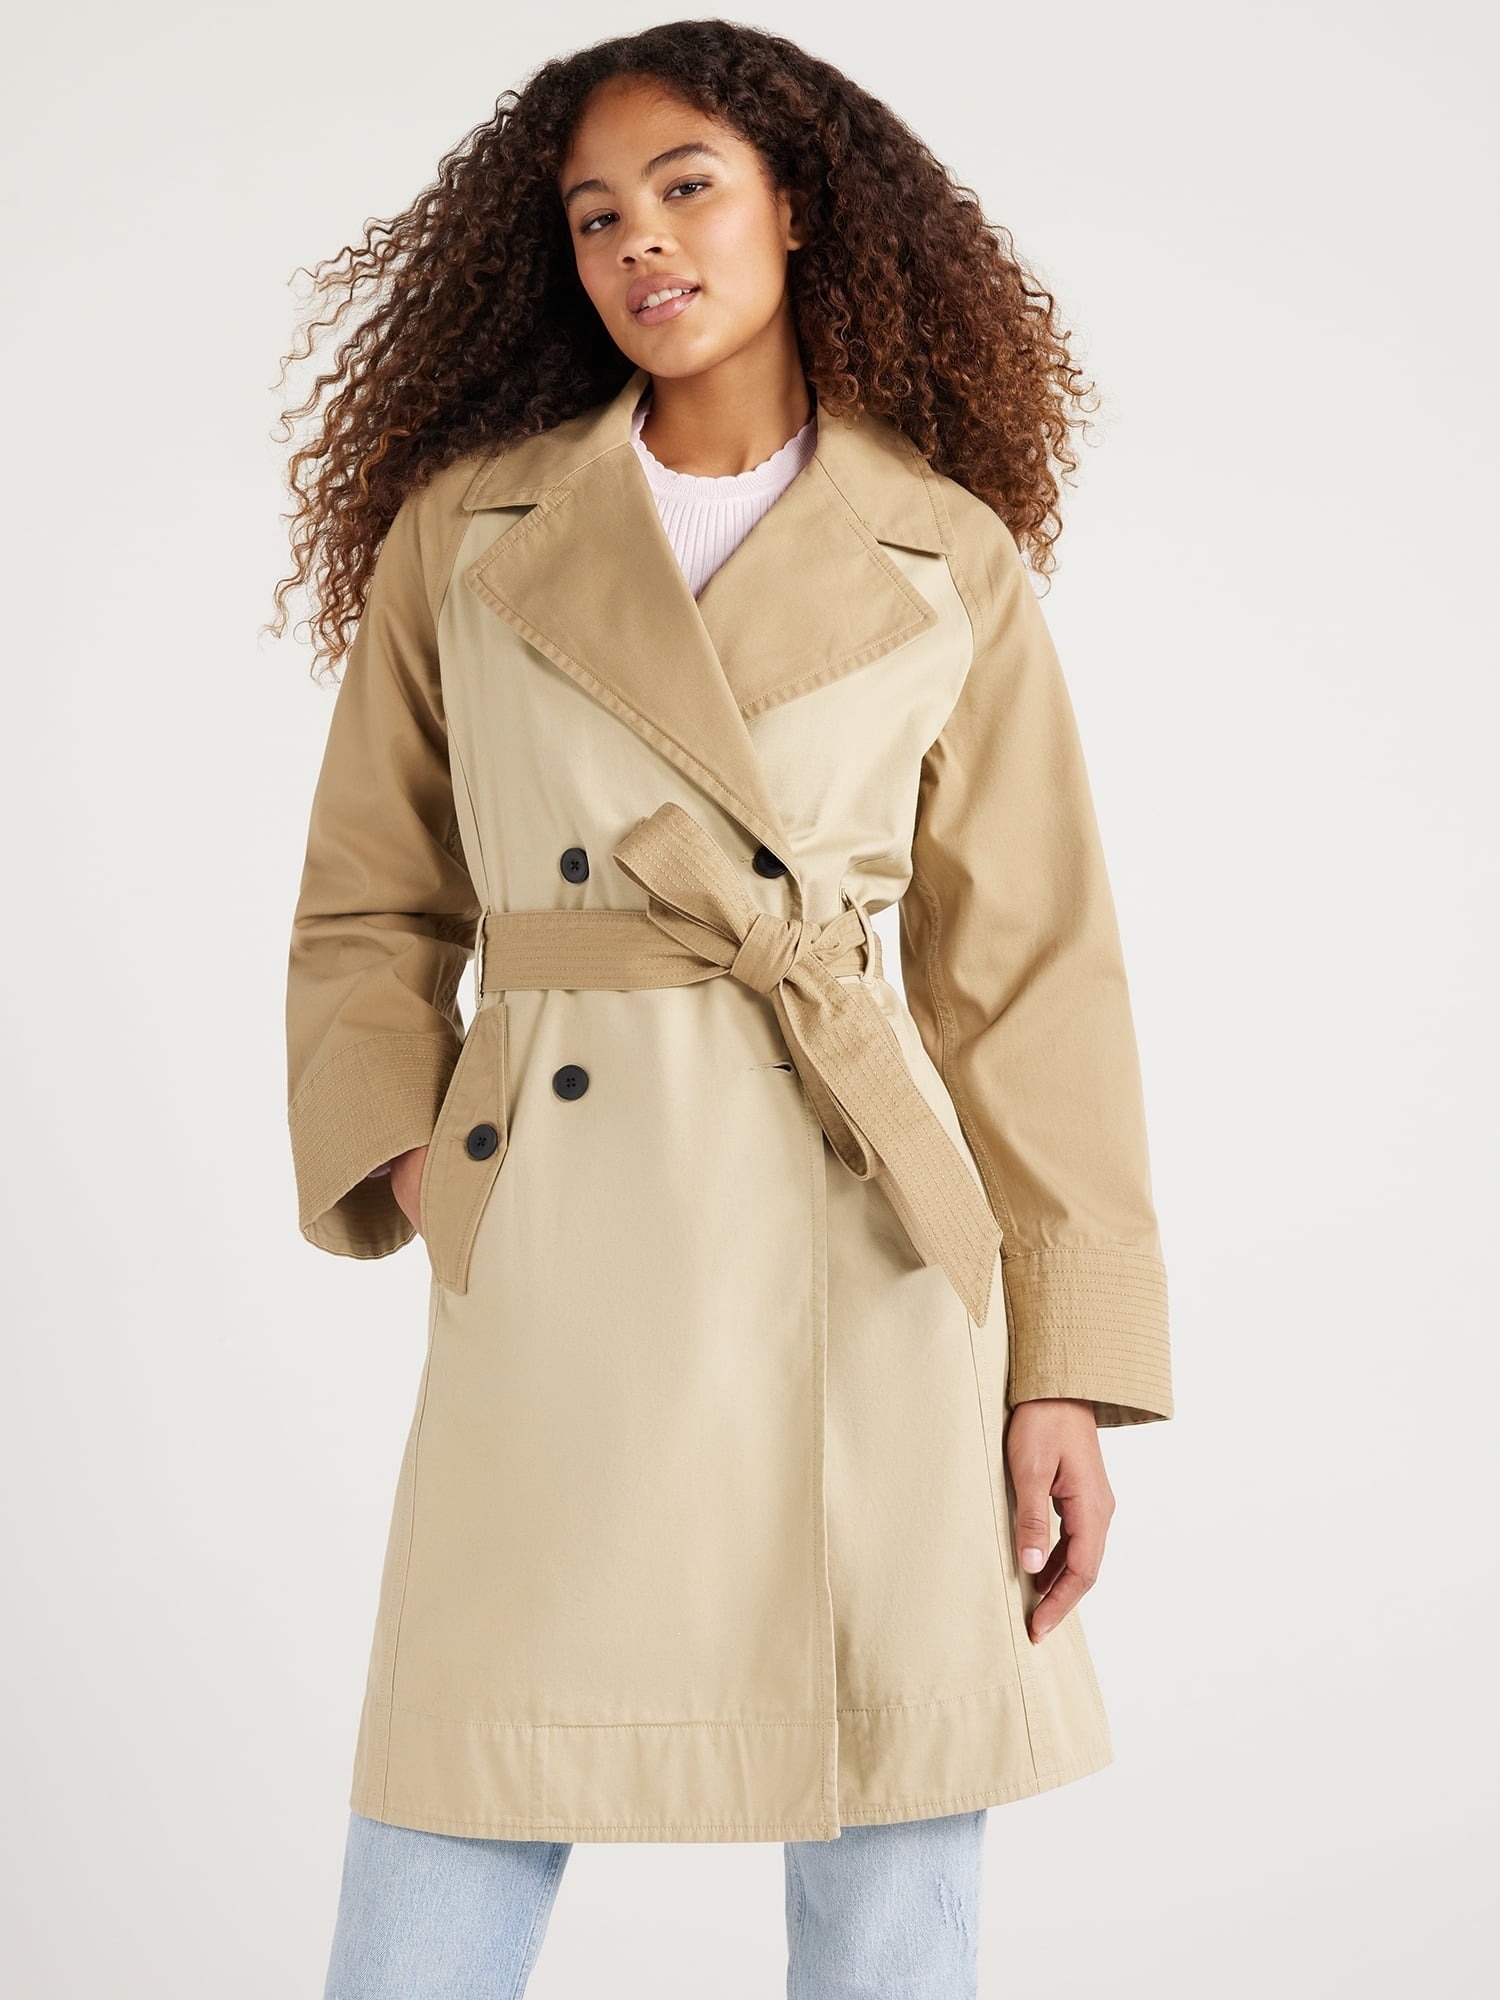 A model wearing a classic trench coat with a belt and button details, paired with jeans